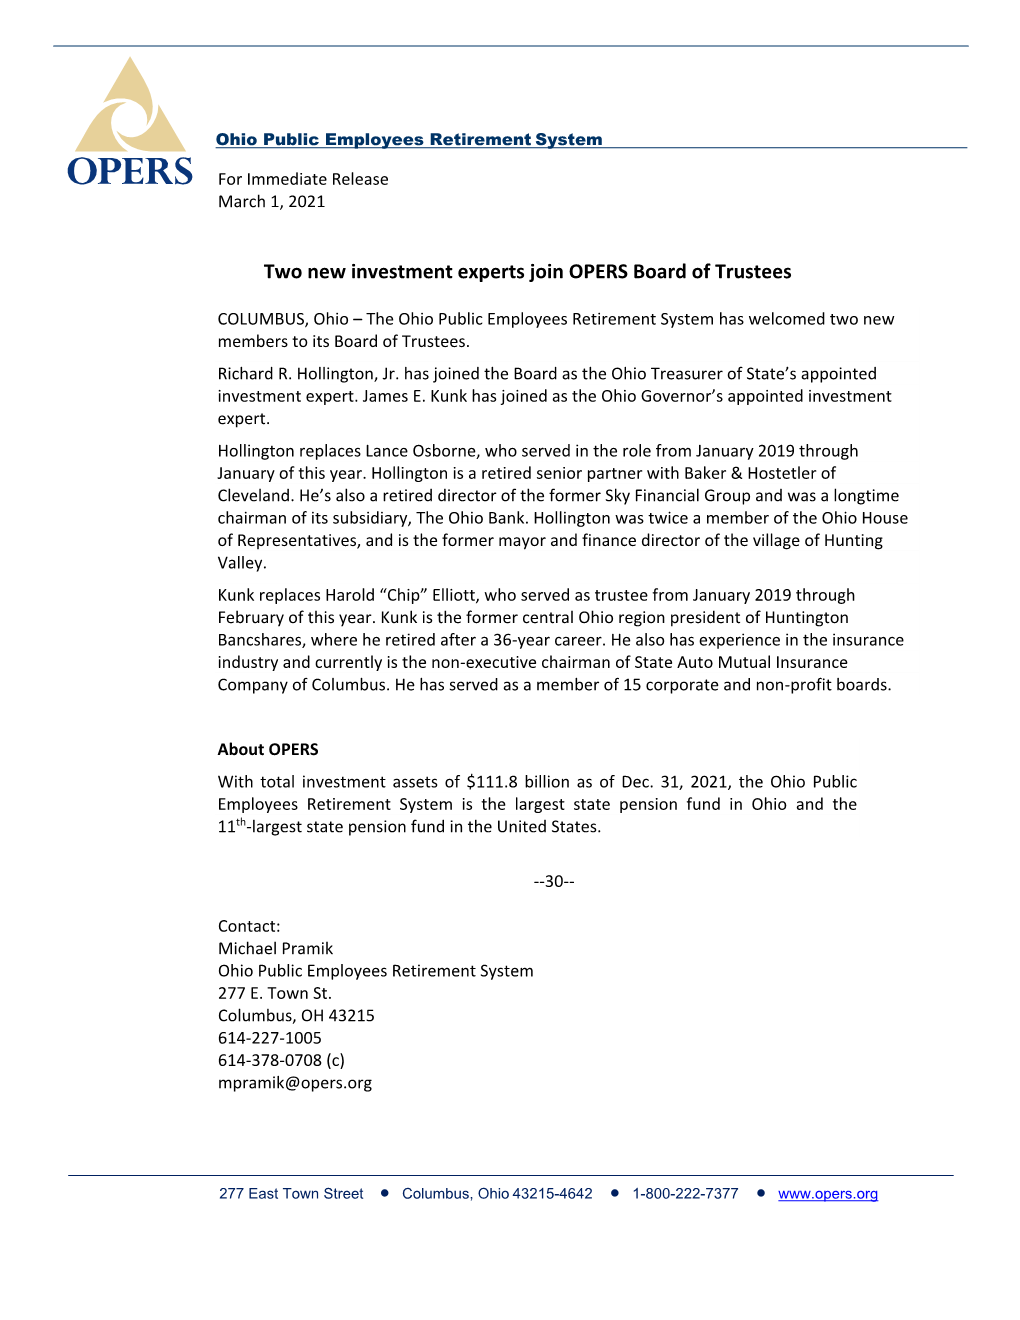 Two New Investment Experts Join OPERS Board of Trustees